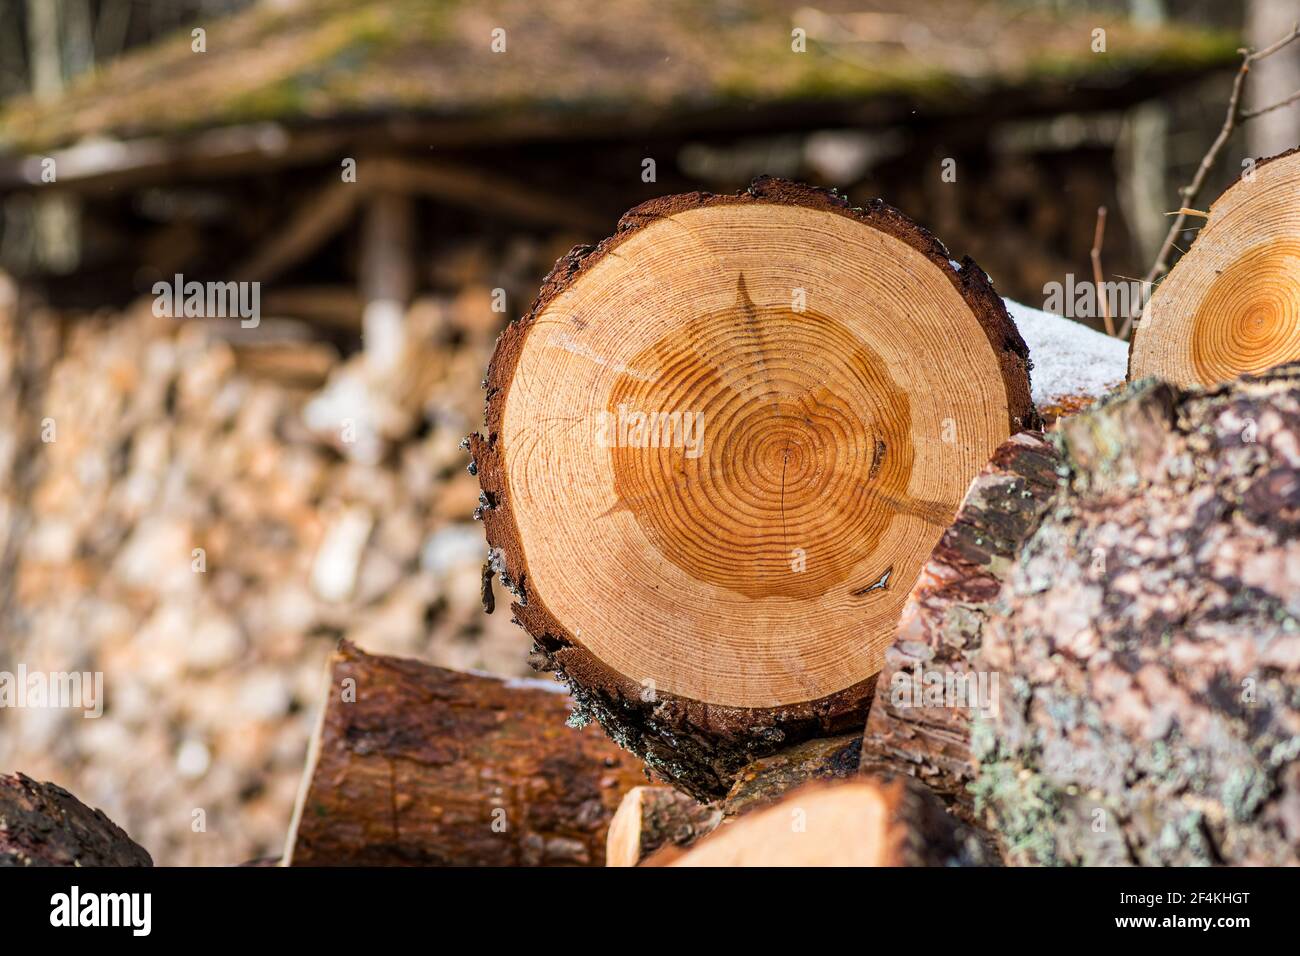 Stack or pile composed of blocks, pieces or logs of wood in winter or spring with snow. Stacking wood for drying and storage, close up Stock Photo